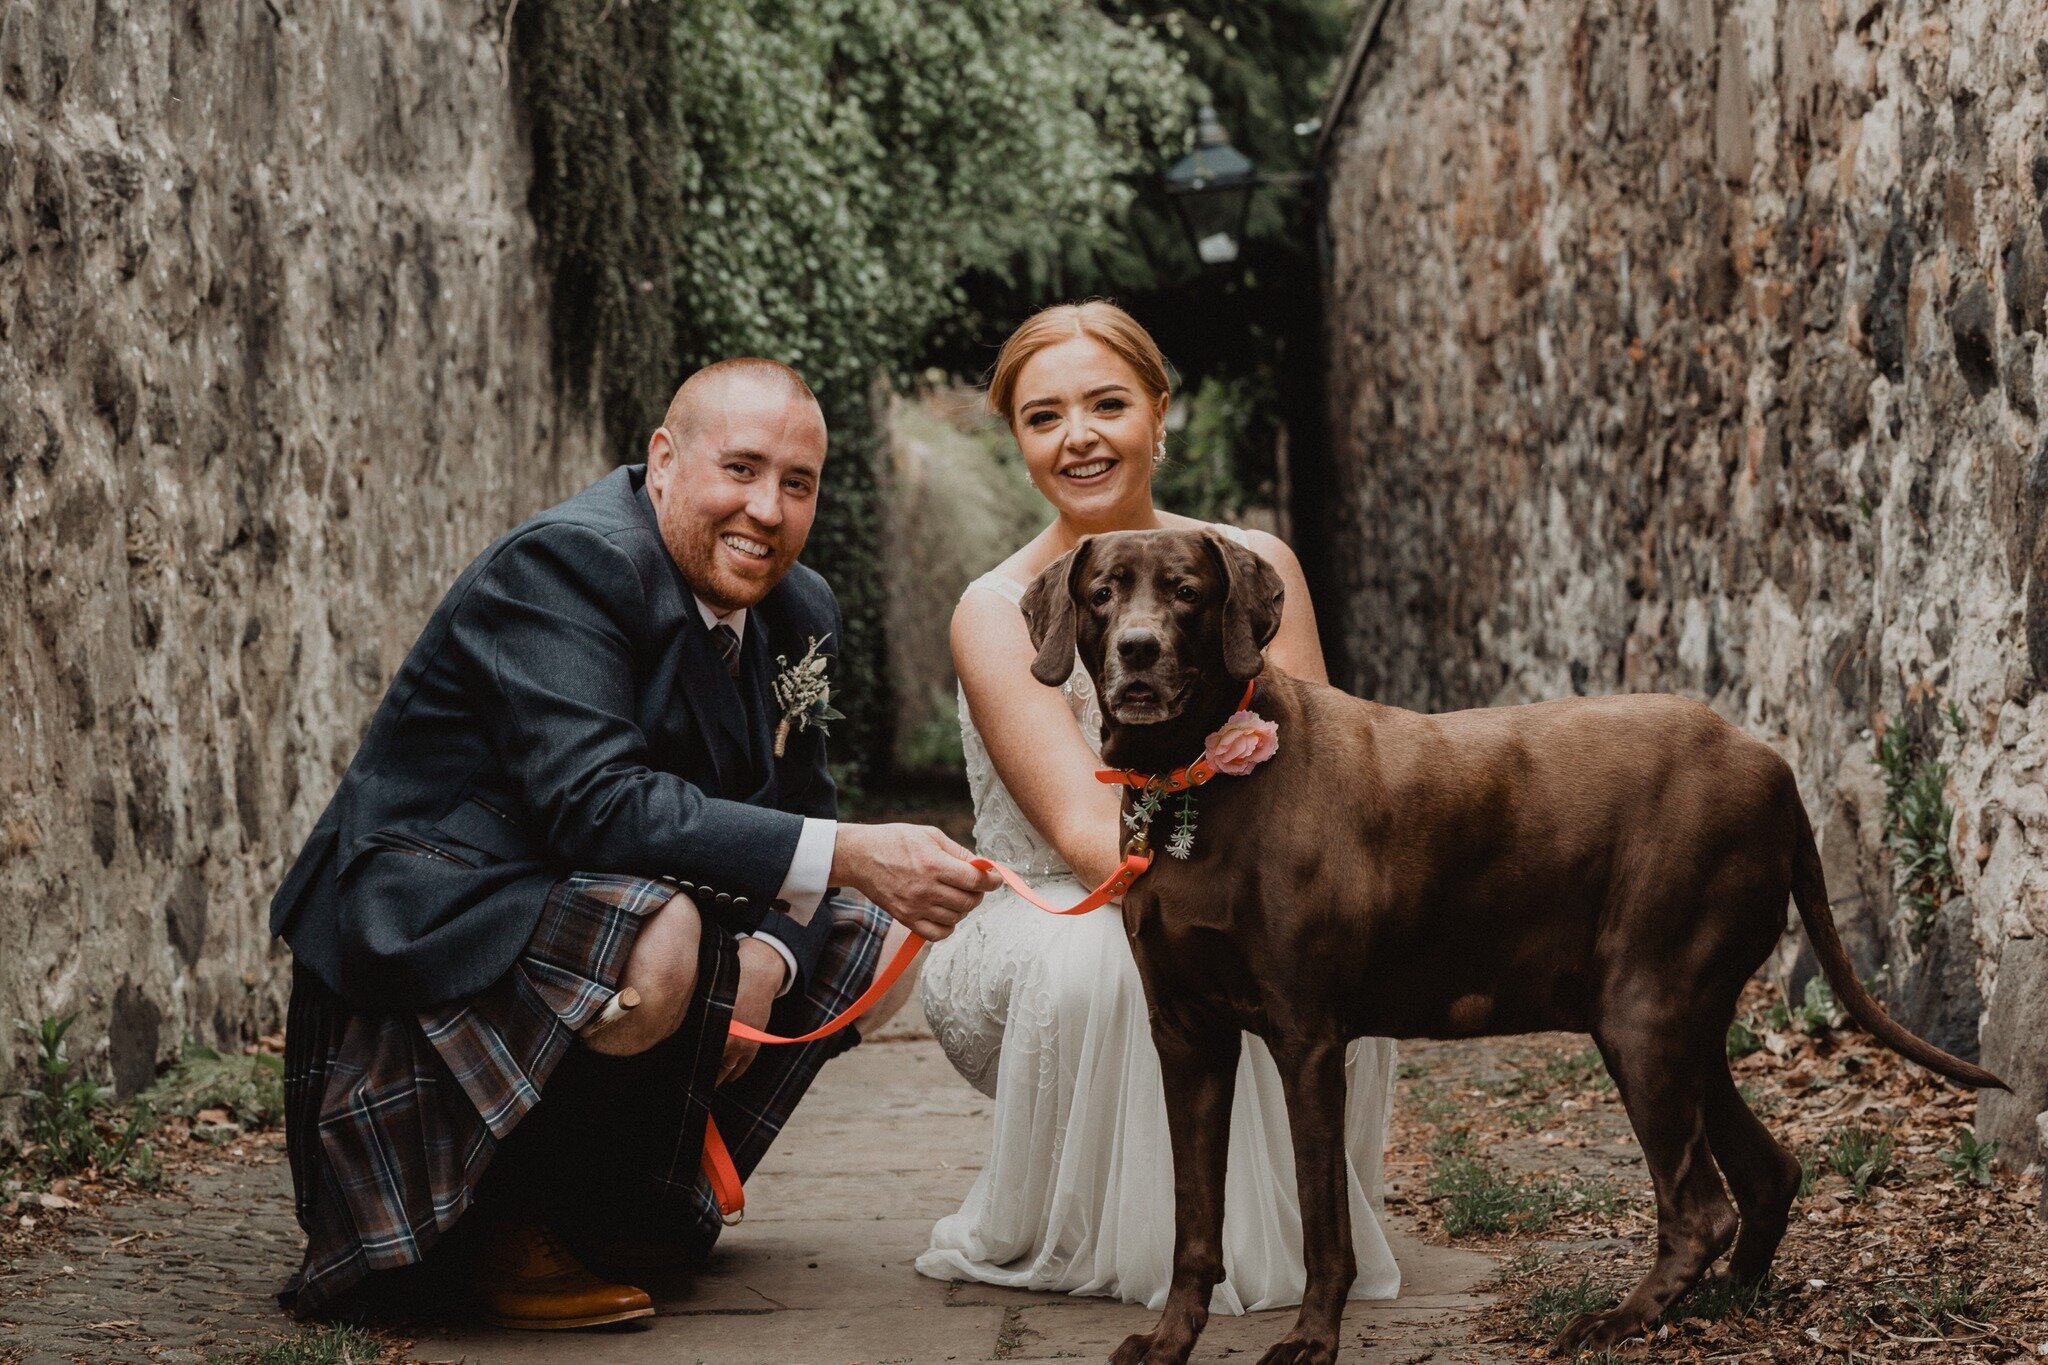 🐾 Happy Birthday 🐾

...to this absolute legend...Ruby 🐾

(FYI, you should absolutely have your dog(s) at your wedding!) 

-

@erindurham_

Flowers - @theflowerstudio__
Hair - @rosheen.warnockhair
Make-Up - @rfm.beauty
Dress - @phaseeight
Kilt - @e